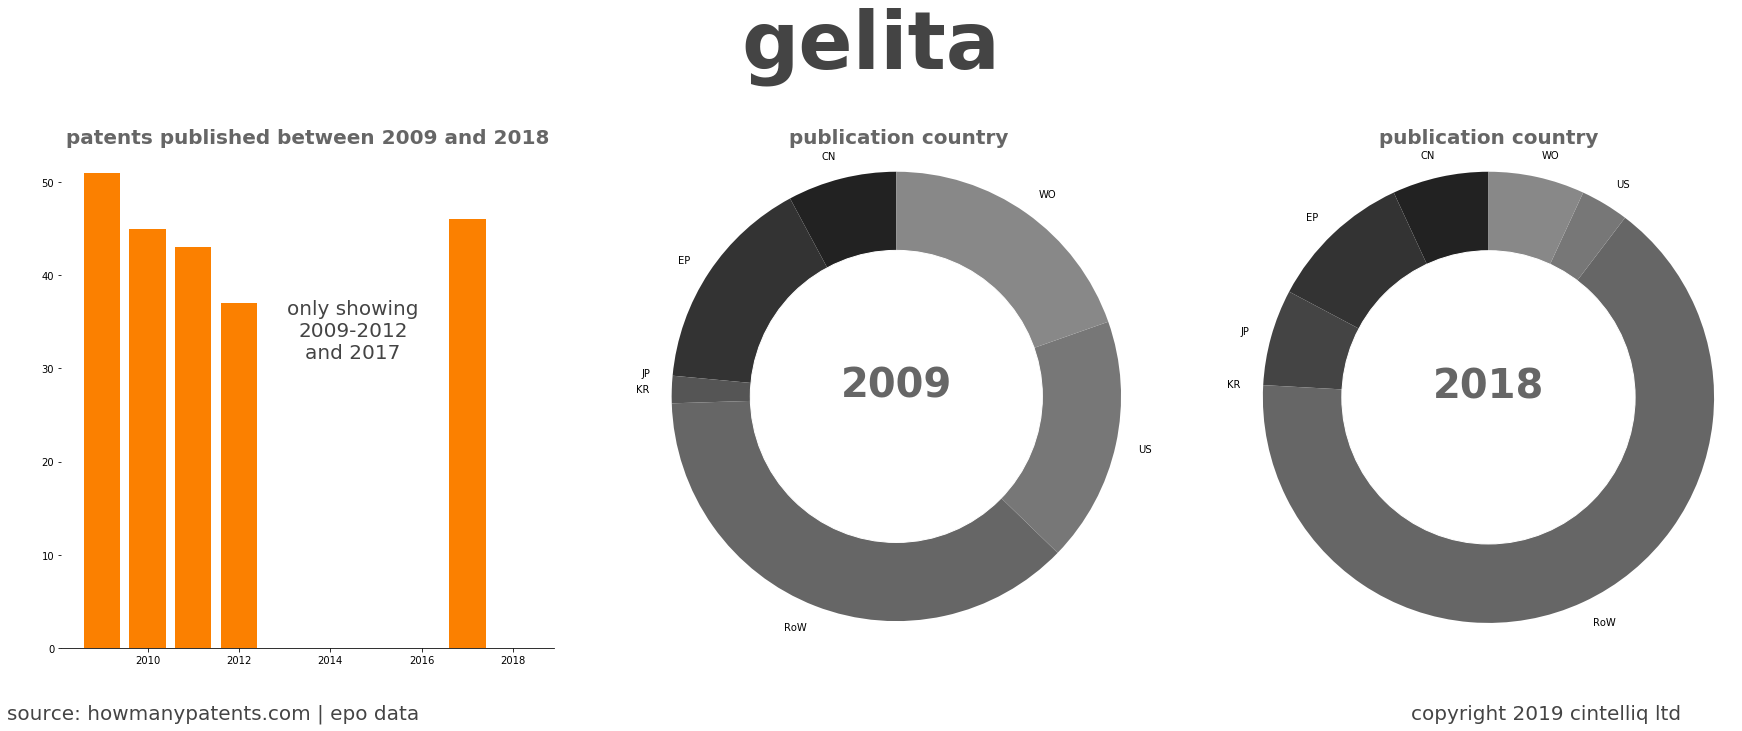 summary of patents for Gelita